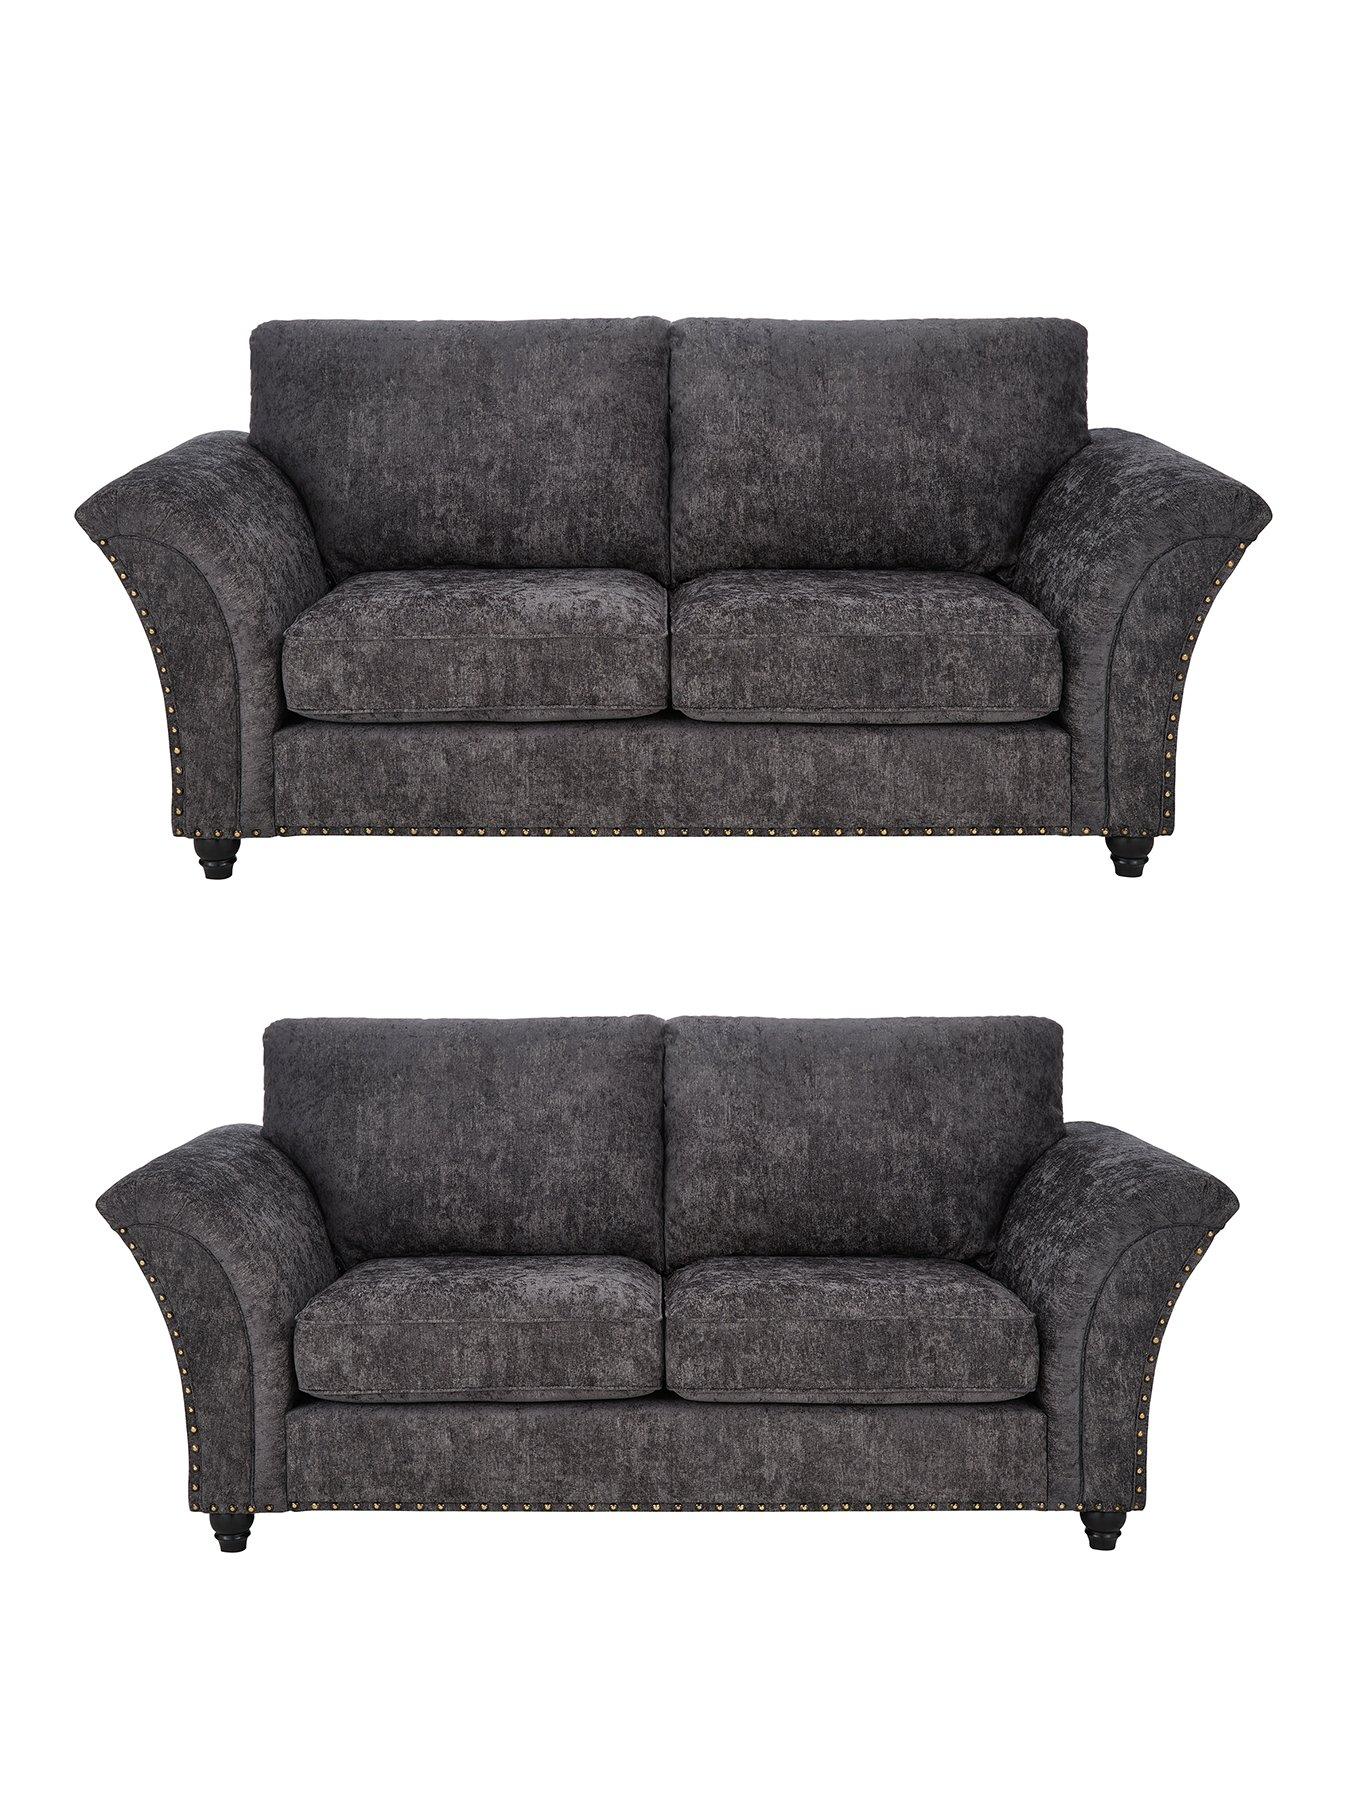 Very Home Ariel 3 + 2 Seater Fabric Sofa Set (Buy  Save!) - Charcoal - Fsc Certified